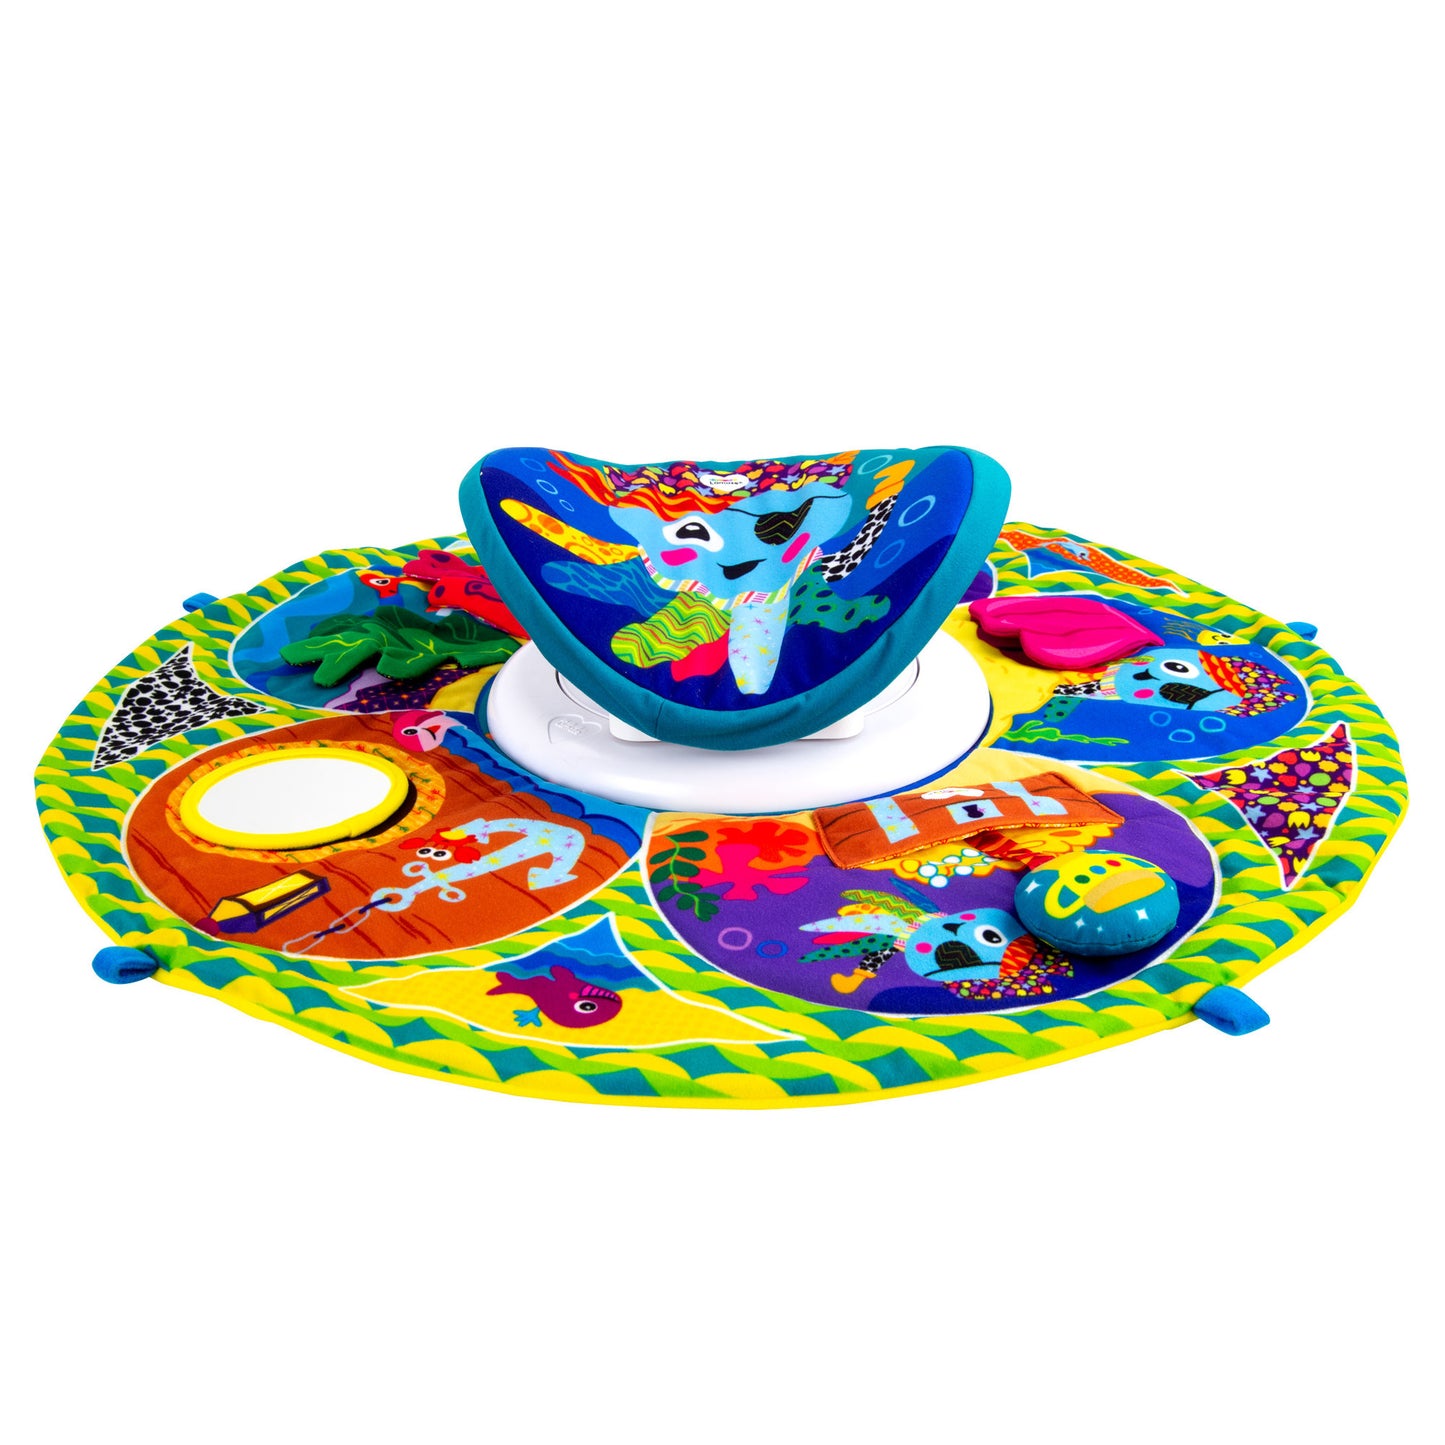 Lamaze Spin & Explore Gym l To Buy at Baby City